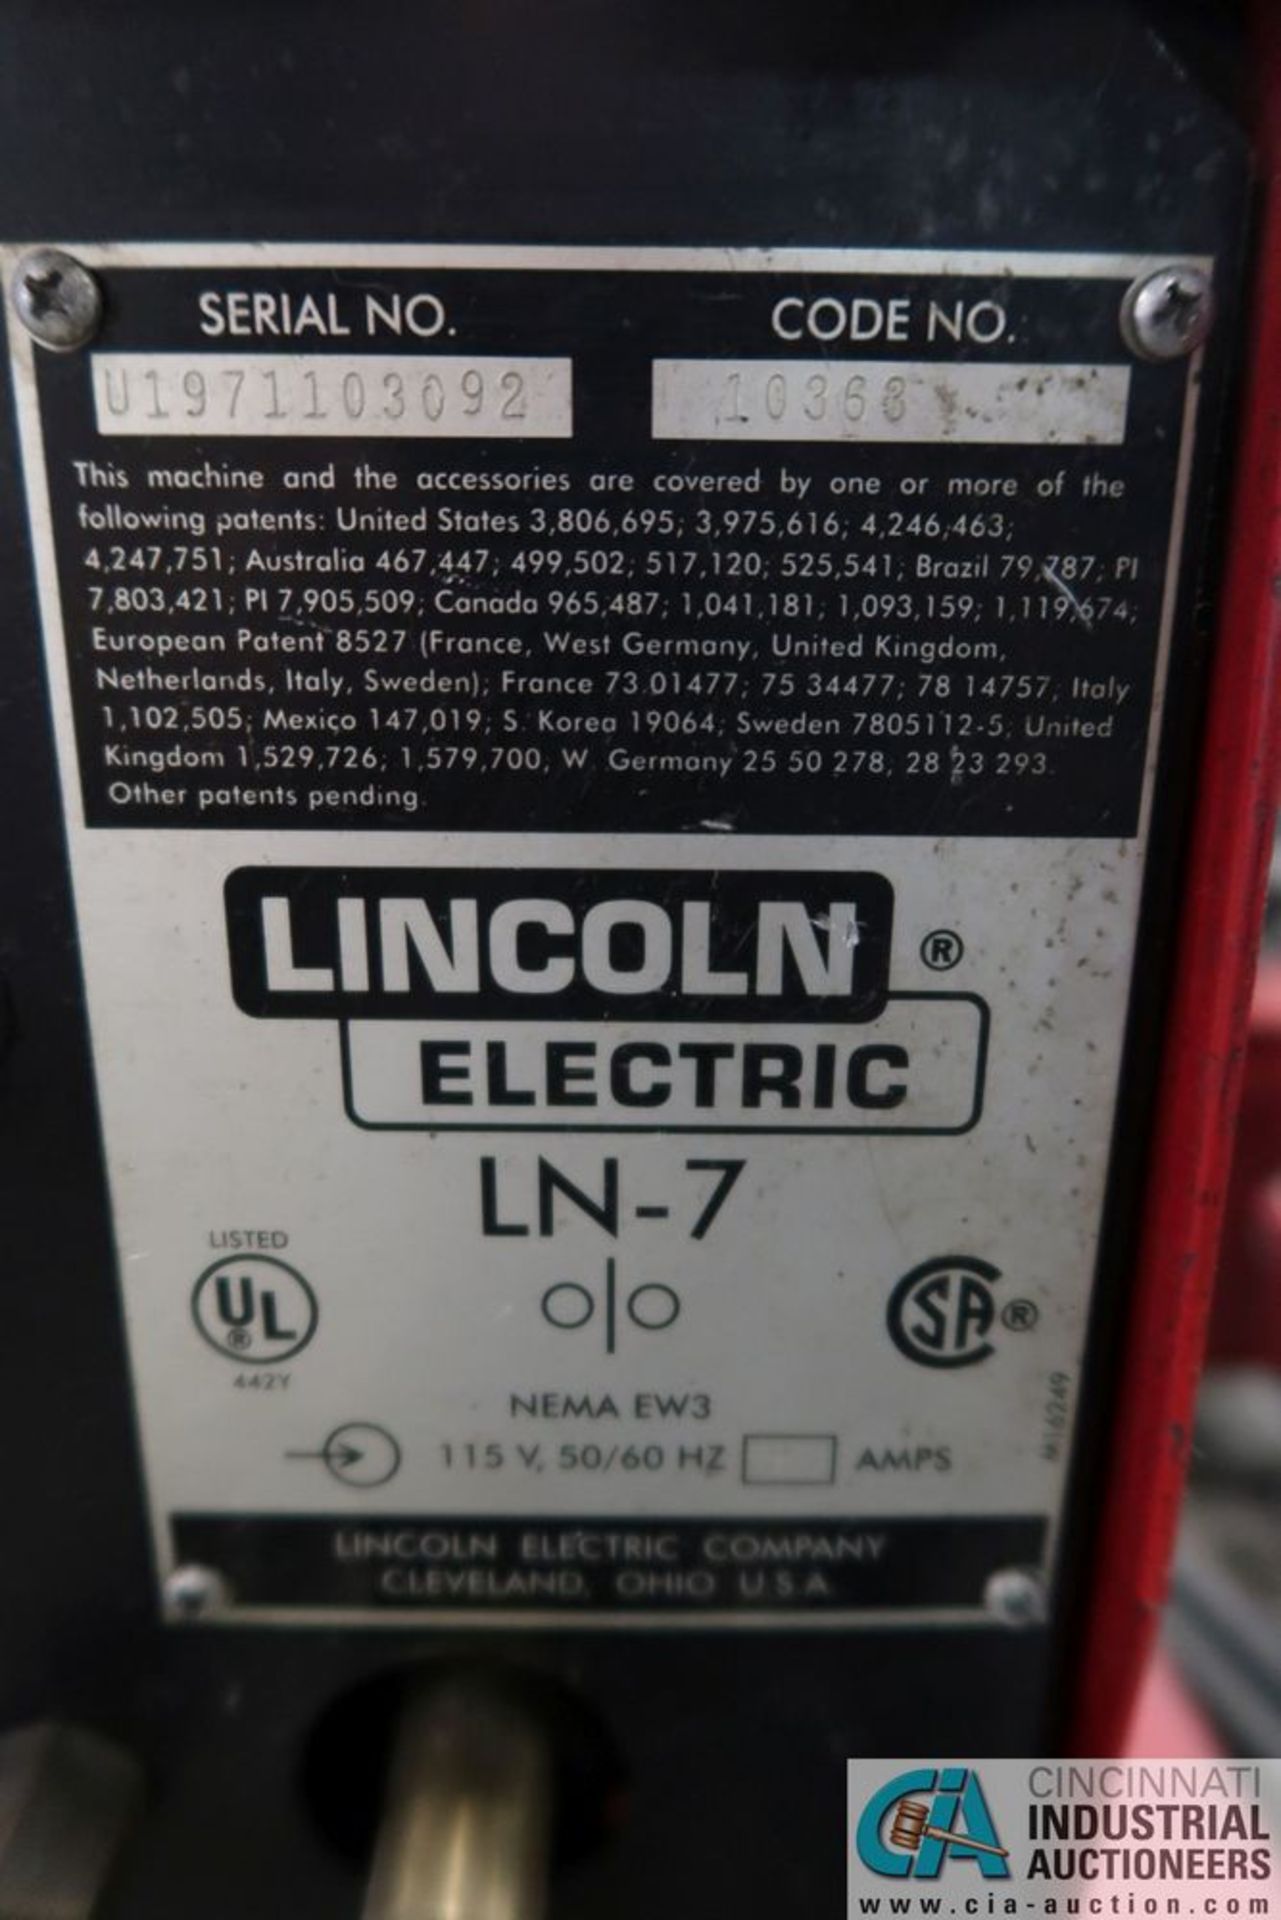 300 AMP LINCOLN CV-300 WELDER; S/N U1971010901, WITH LINCOLN LN-7 WIRE FEED - Image 7 of 7